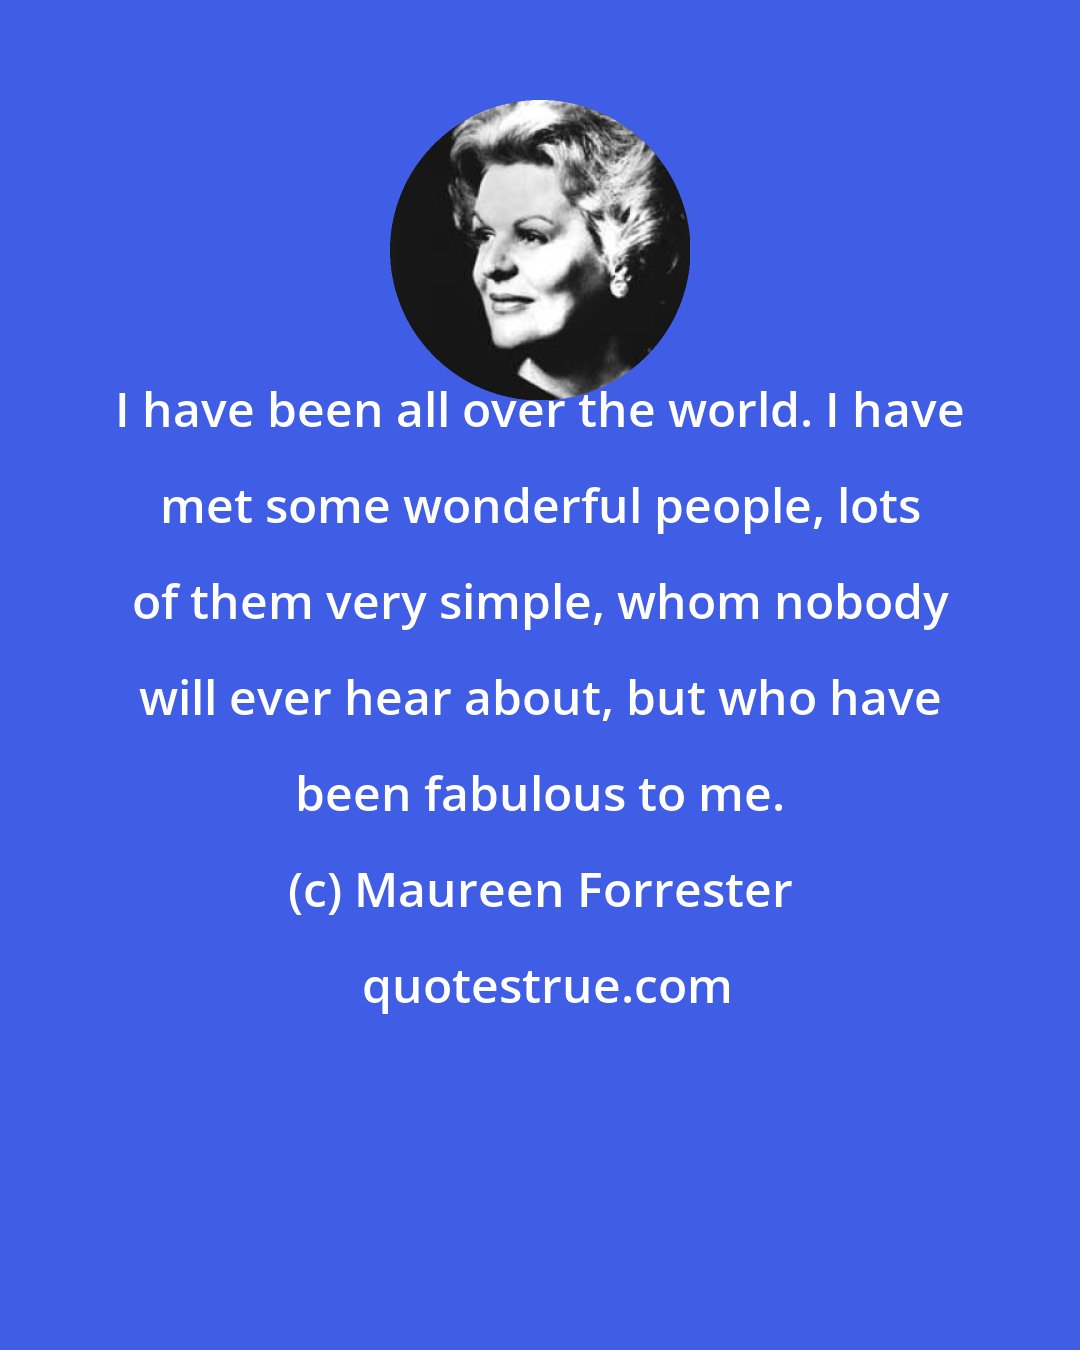 Maureen Forrester: I have been all over the world. I have met some wonderful people, lots of them very simple, whom nobody will ever hear about, but who have been fabulous to me.